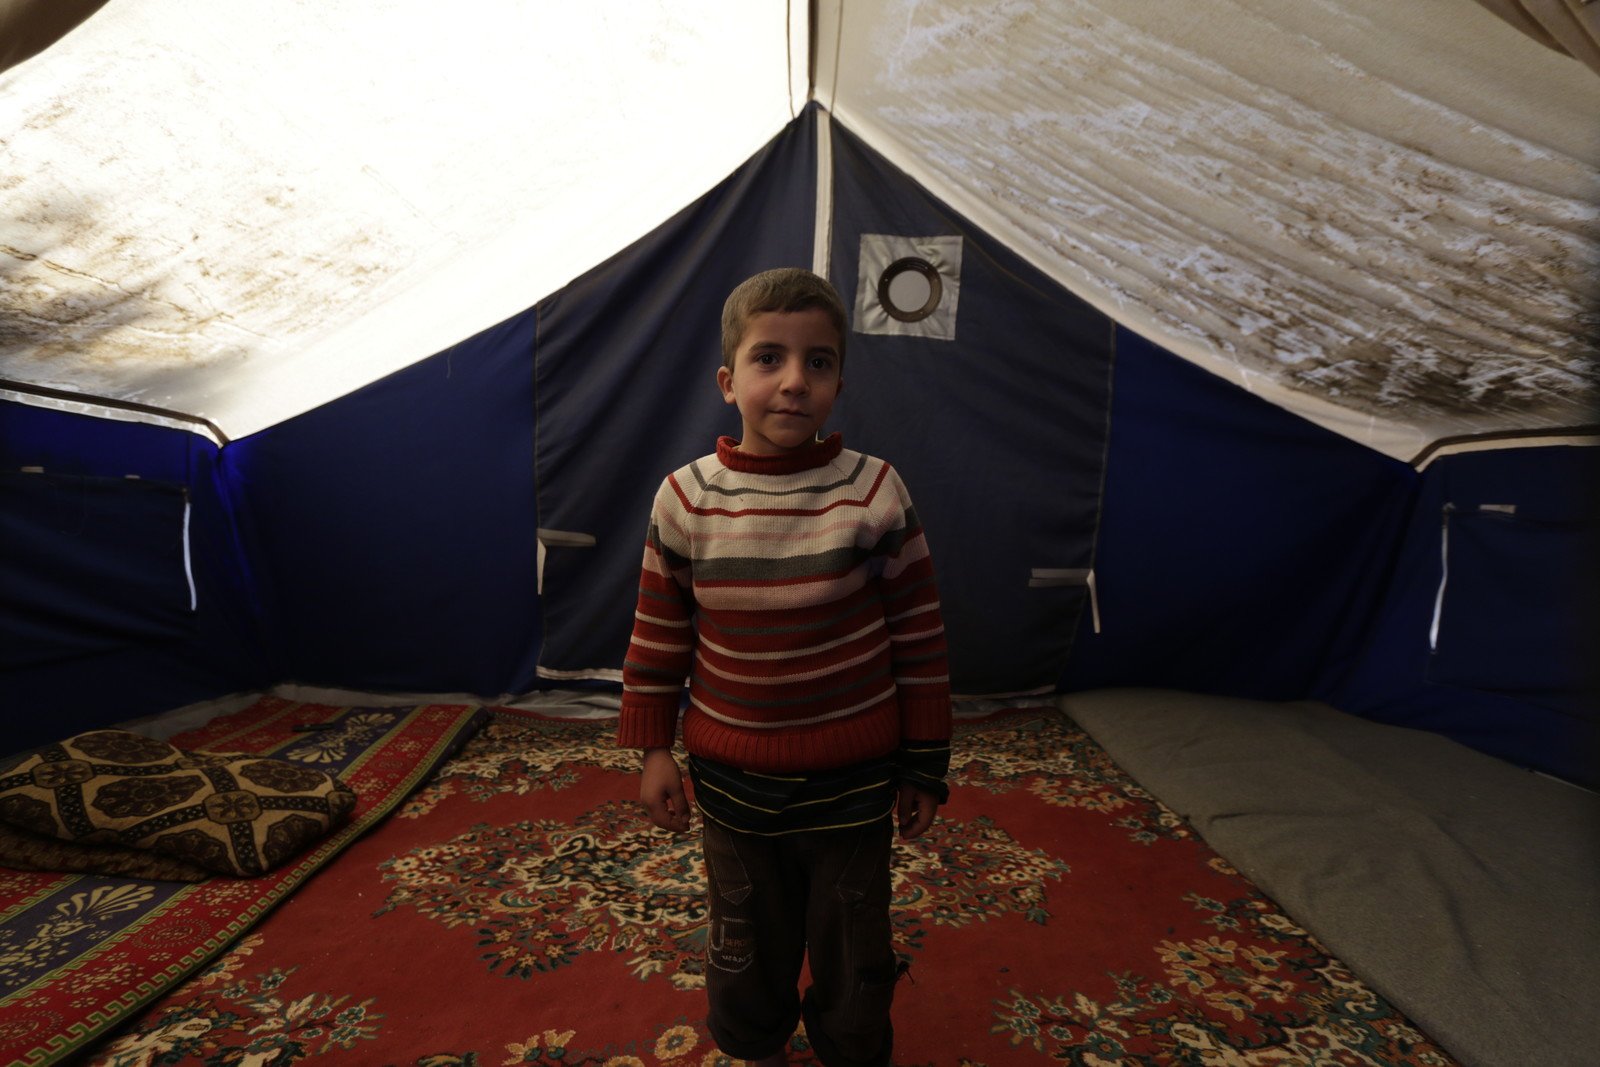 Having lived in a cave and under trees seeking shelter from the war, it was like a dream come true for Karim and his family to finally have their own tent in a camp for displaced people in northern Syria.